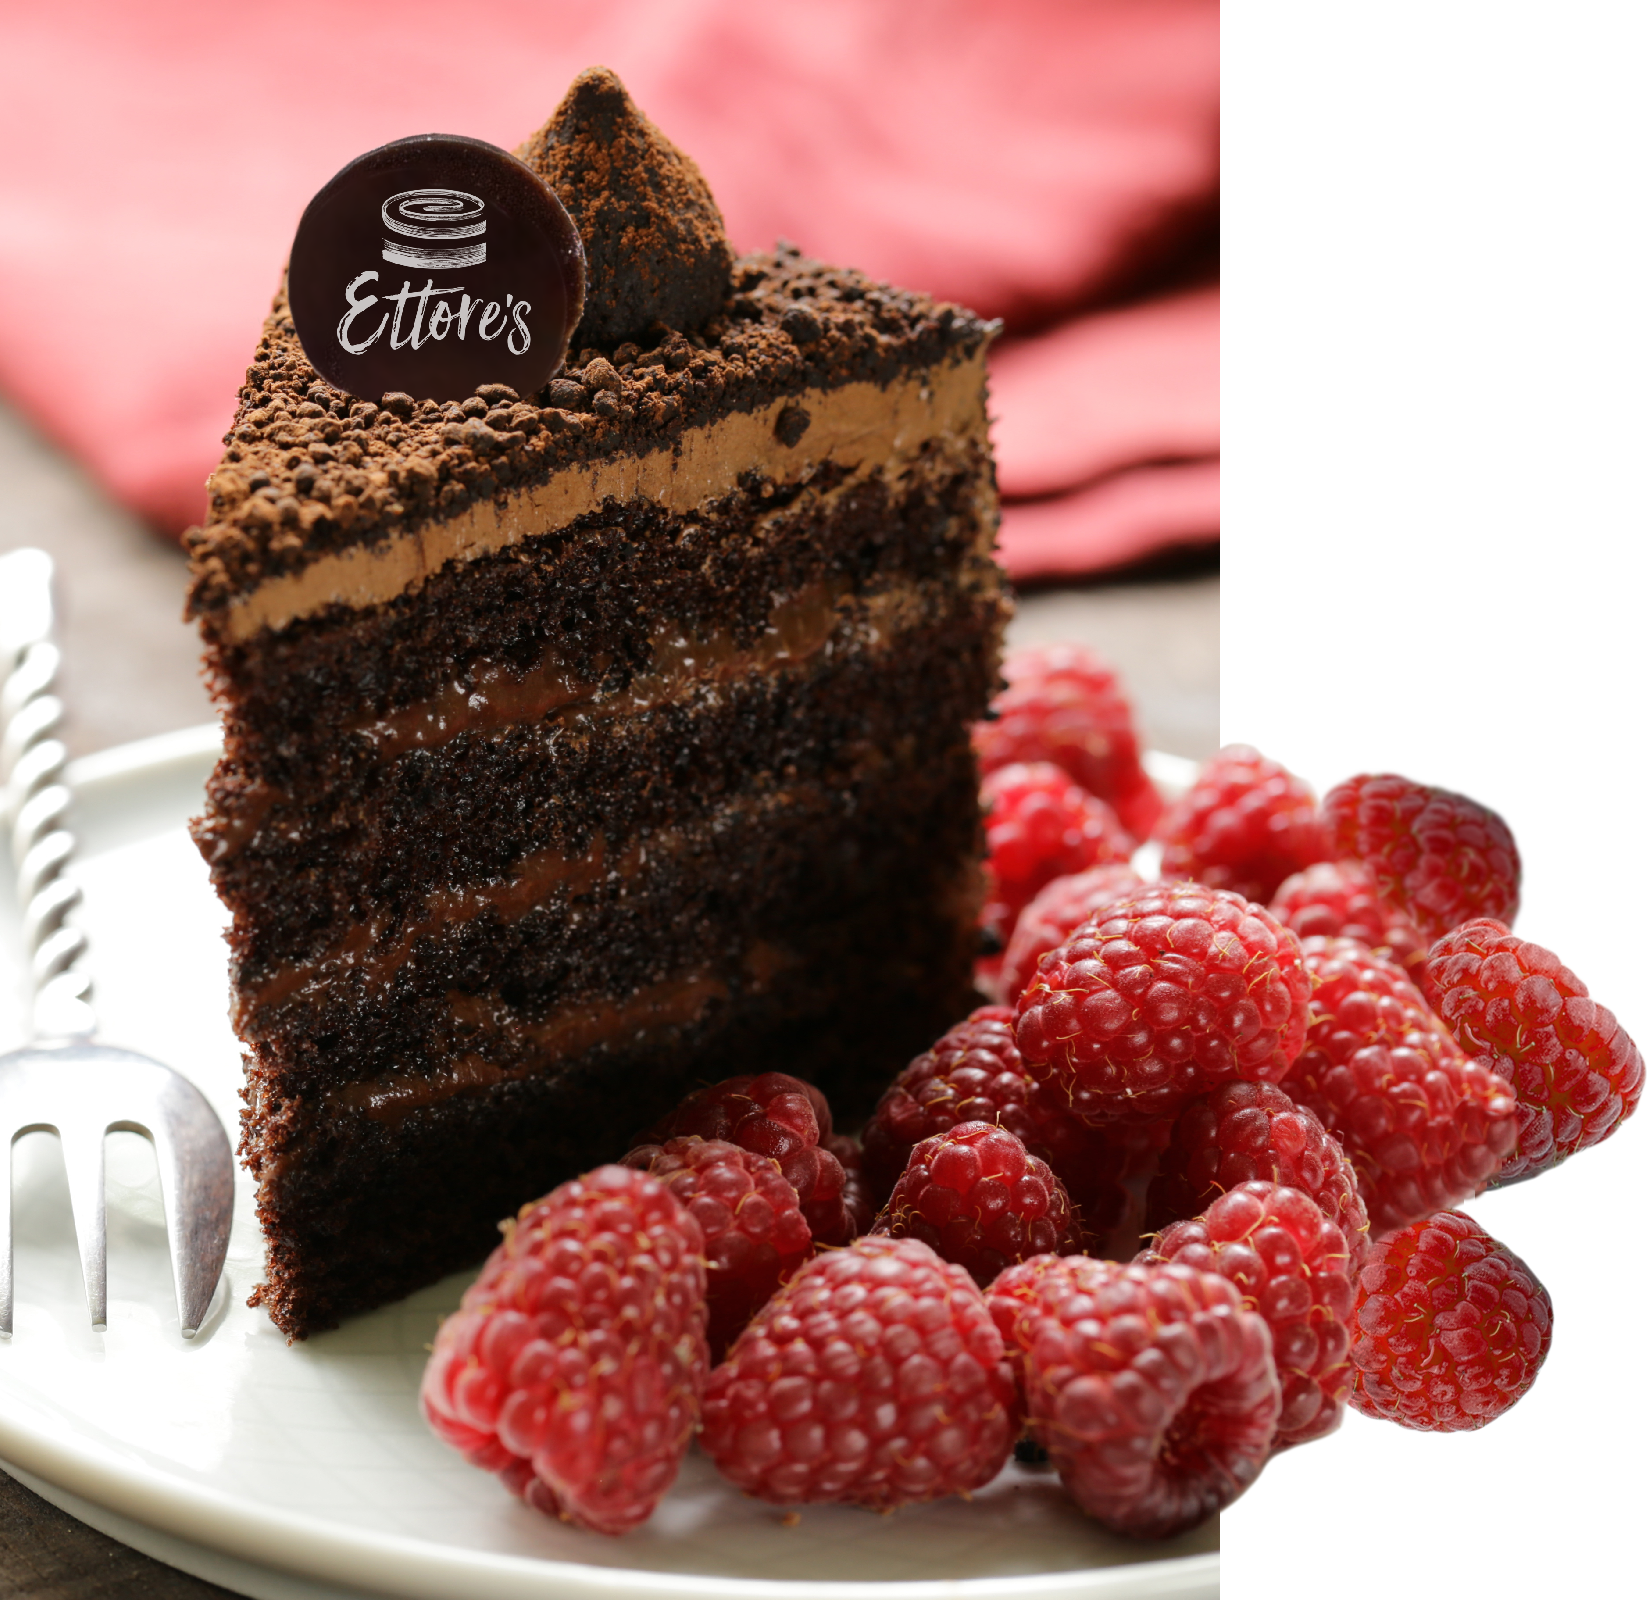 A piece of cake with a chocolate disc on top, showing the new Ettore's logo by Vs.